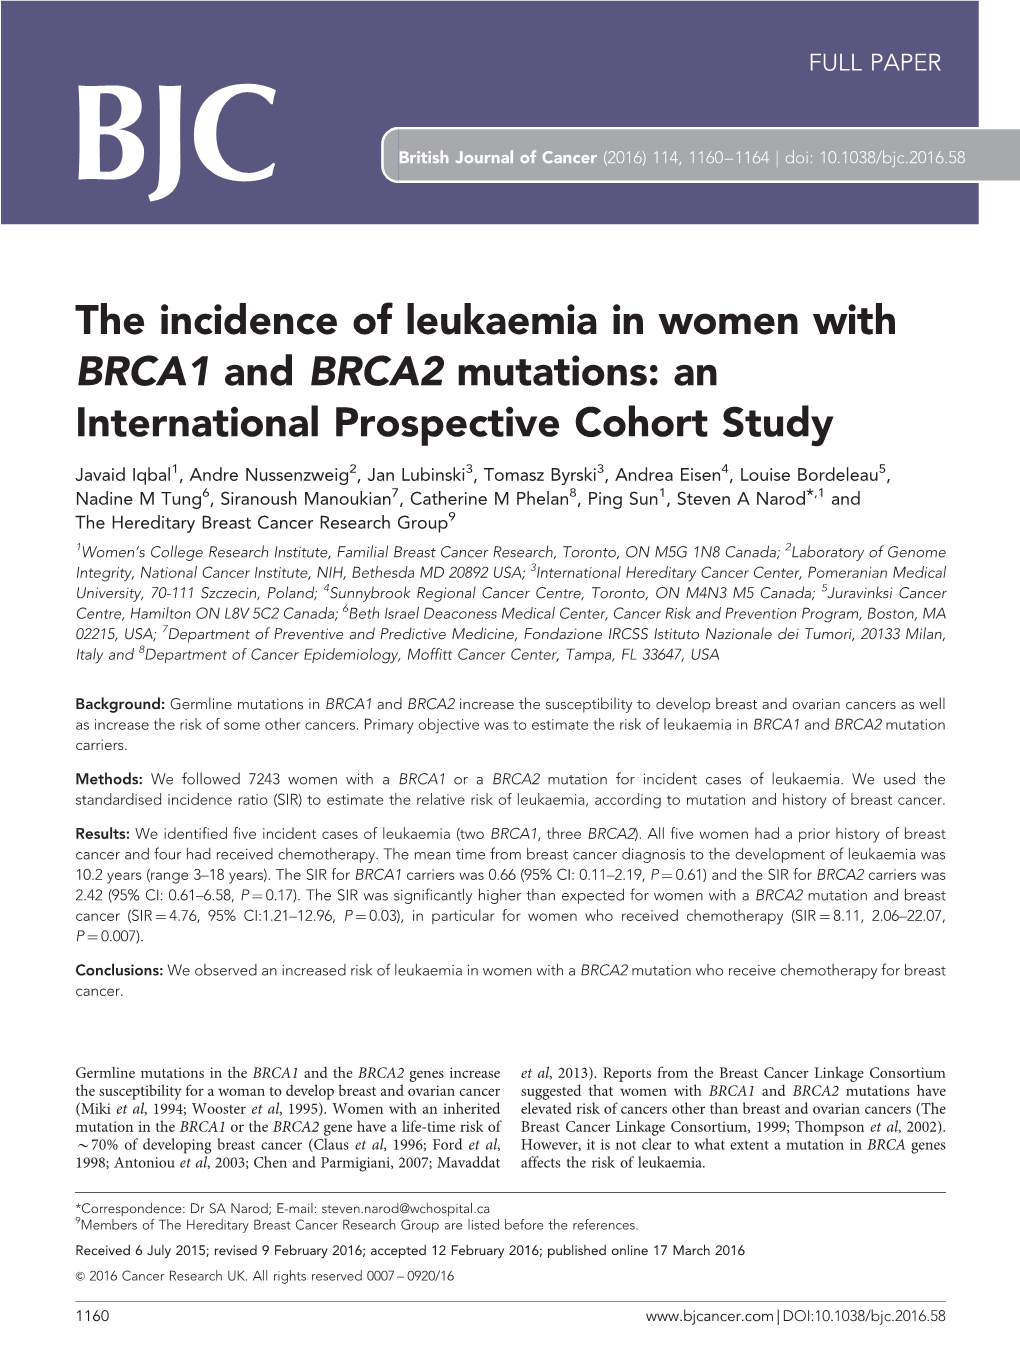 The Incidence of Leukaemia in Women with BRCA1 and BRCA2 Mutations: an International Prospective Cohort Study